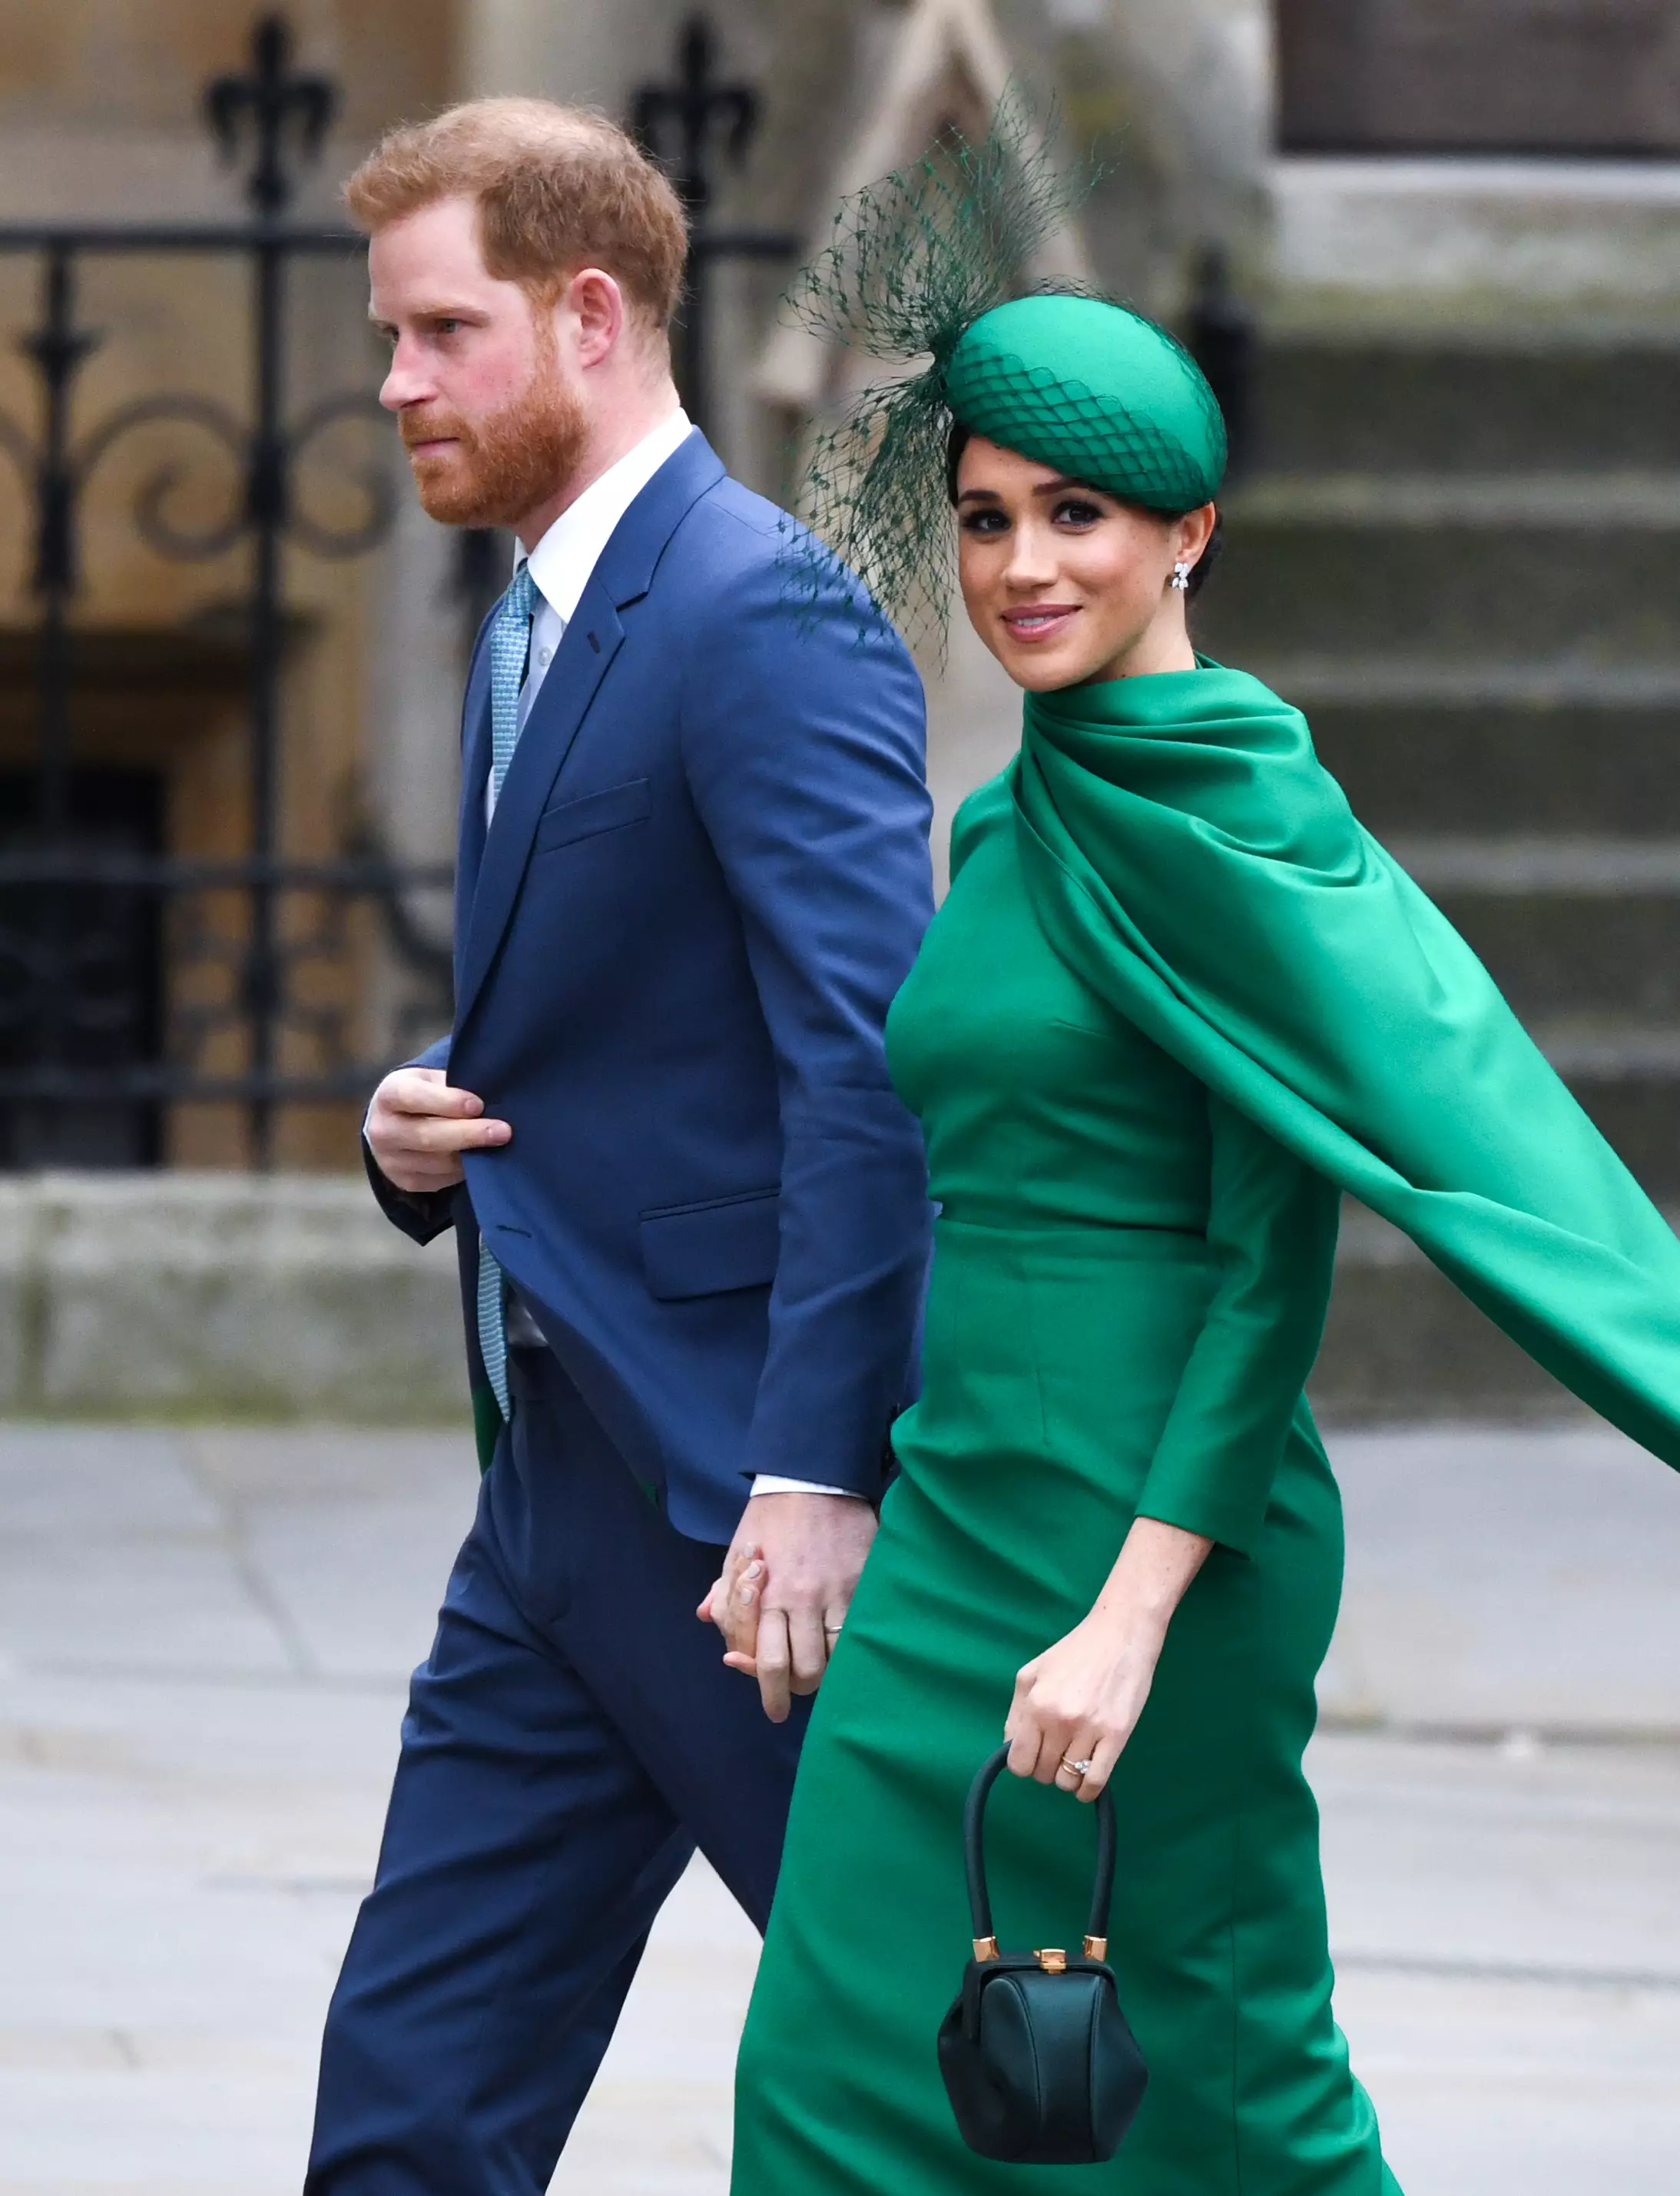 Meghan and Harry last appeared at the Commonwealth Day service back in March (